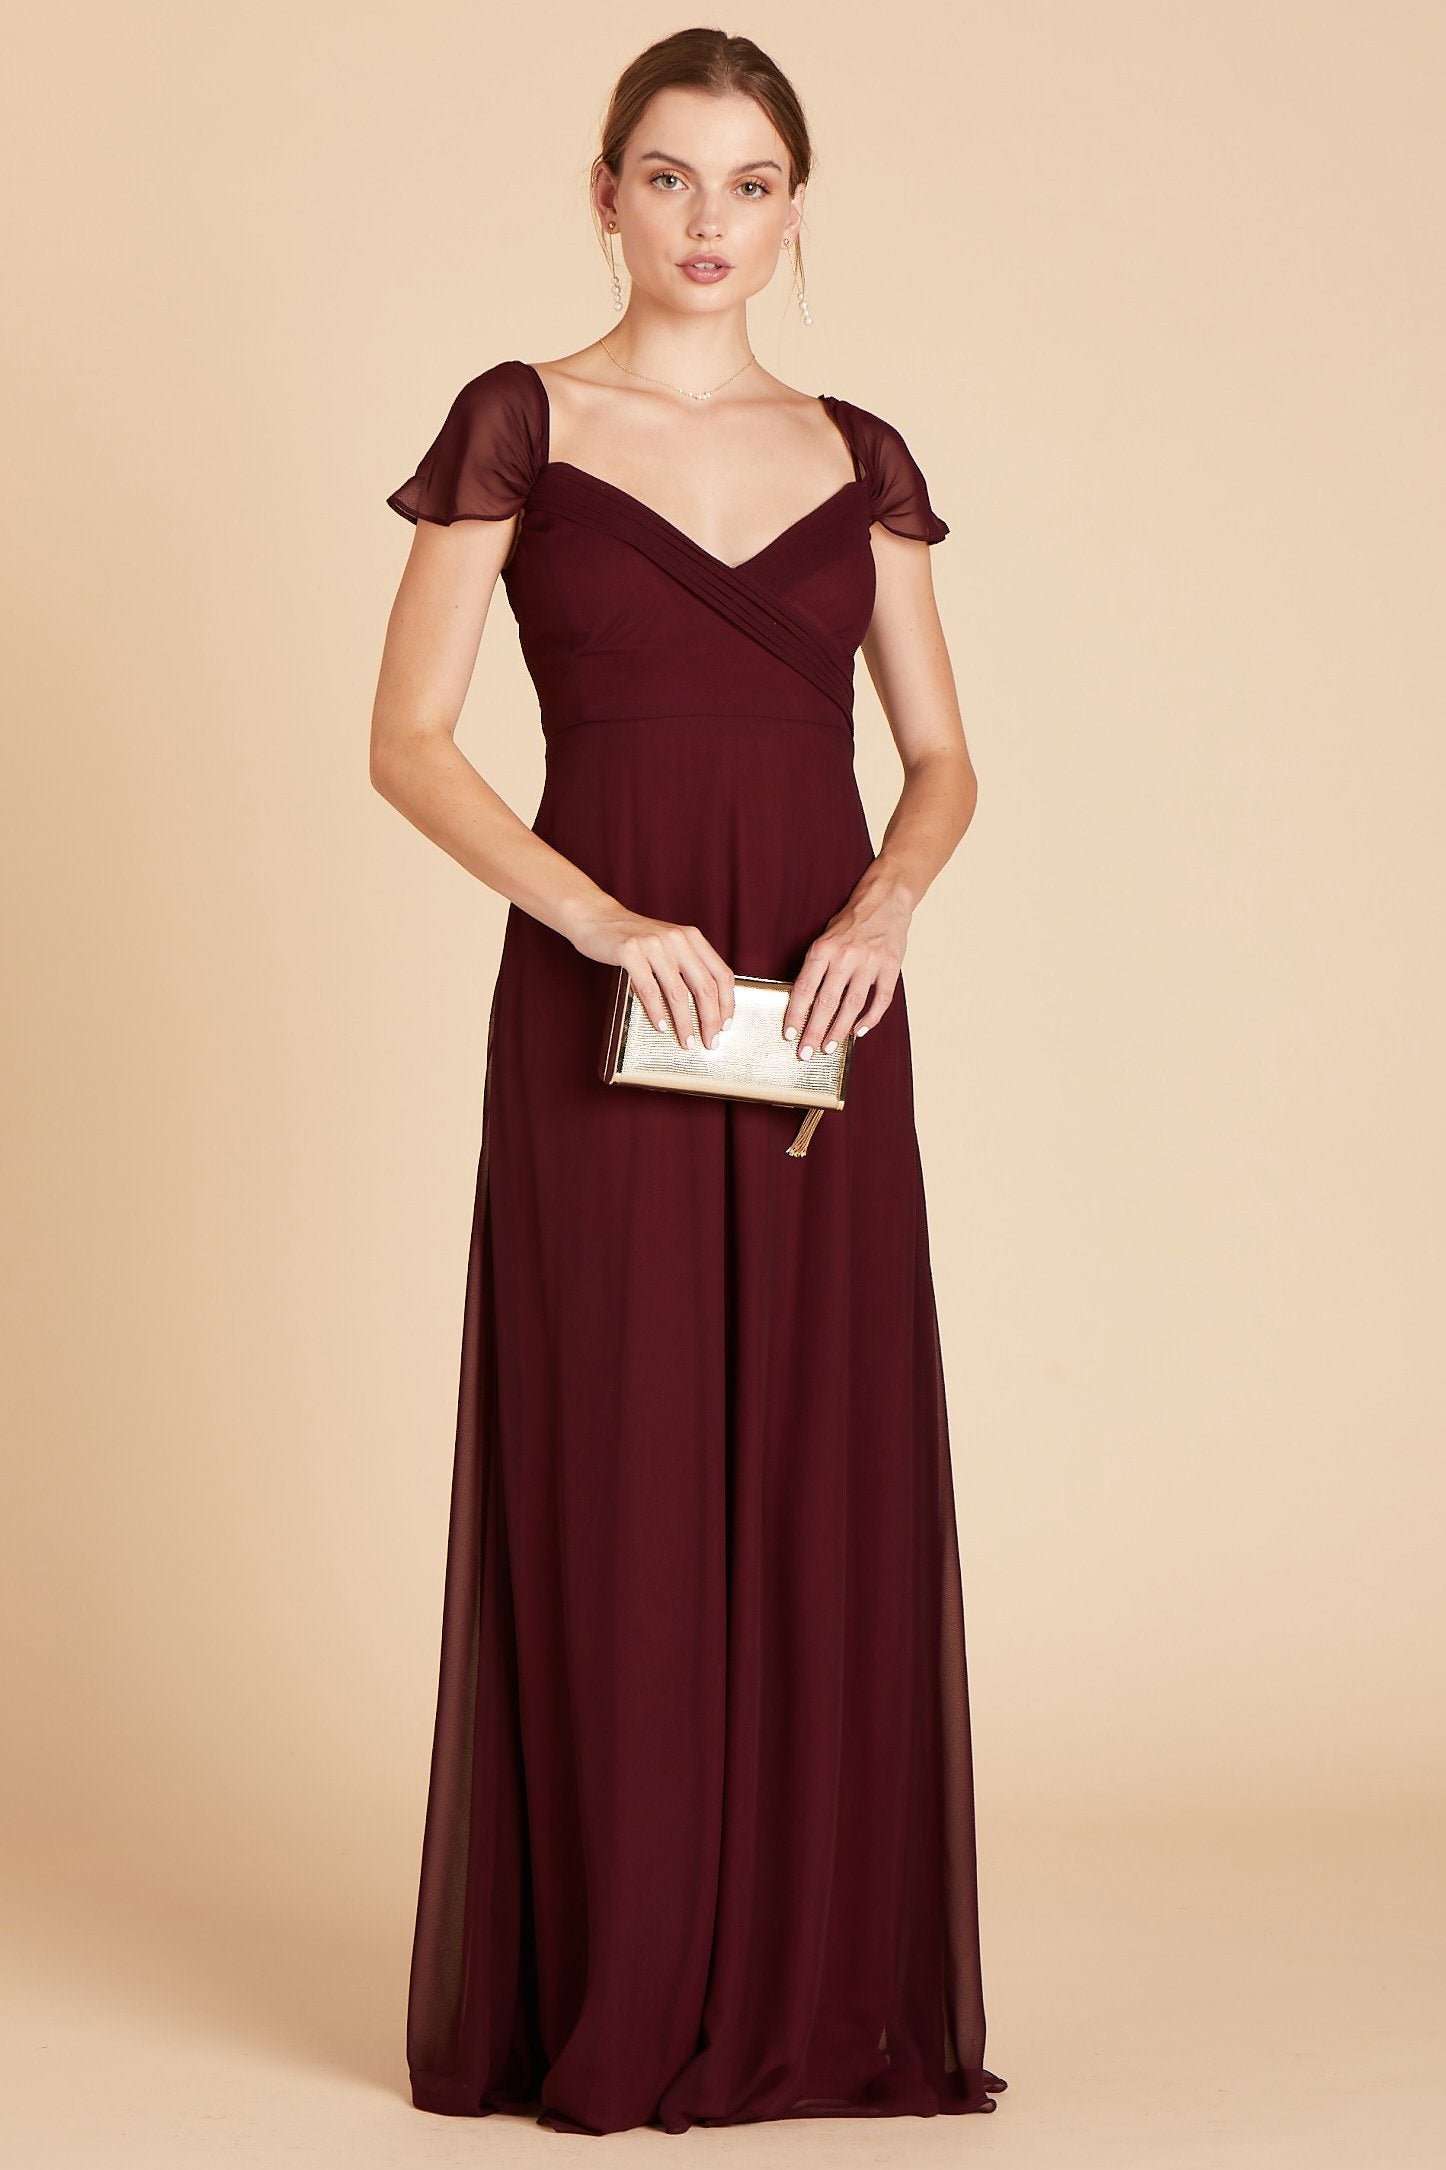 Spence convertible bridesmaid dress in cabernet burgundy chiffon by Birdy Grey, front view